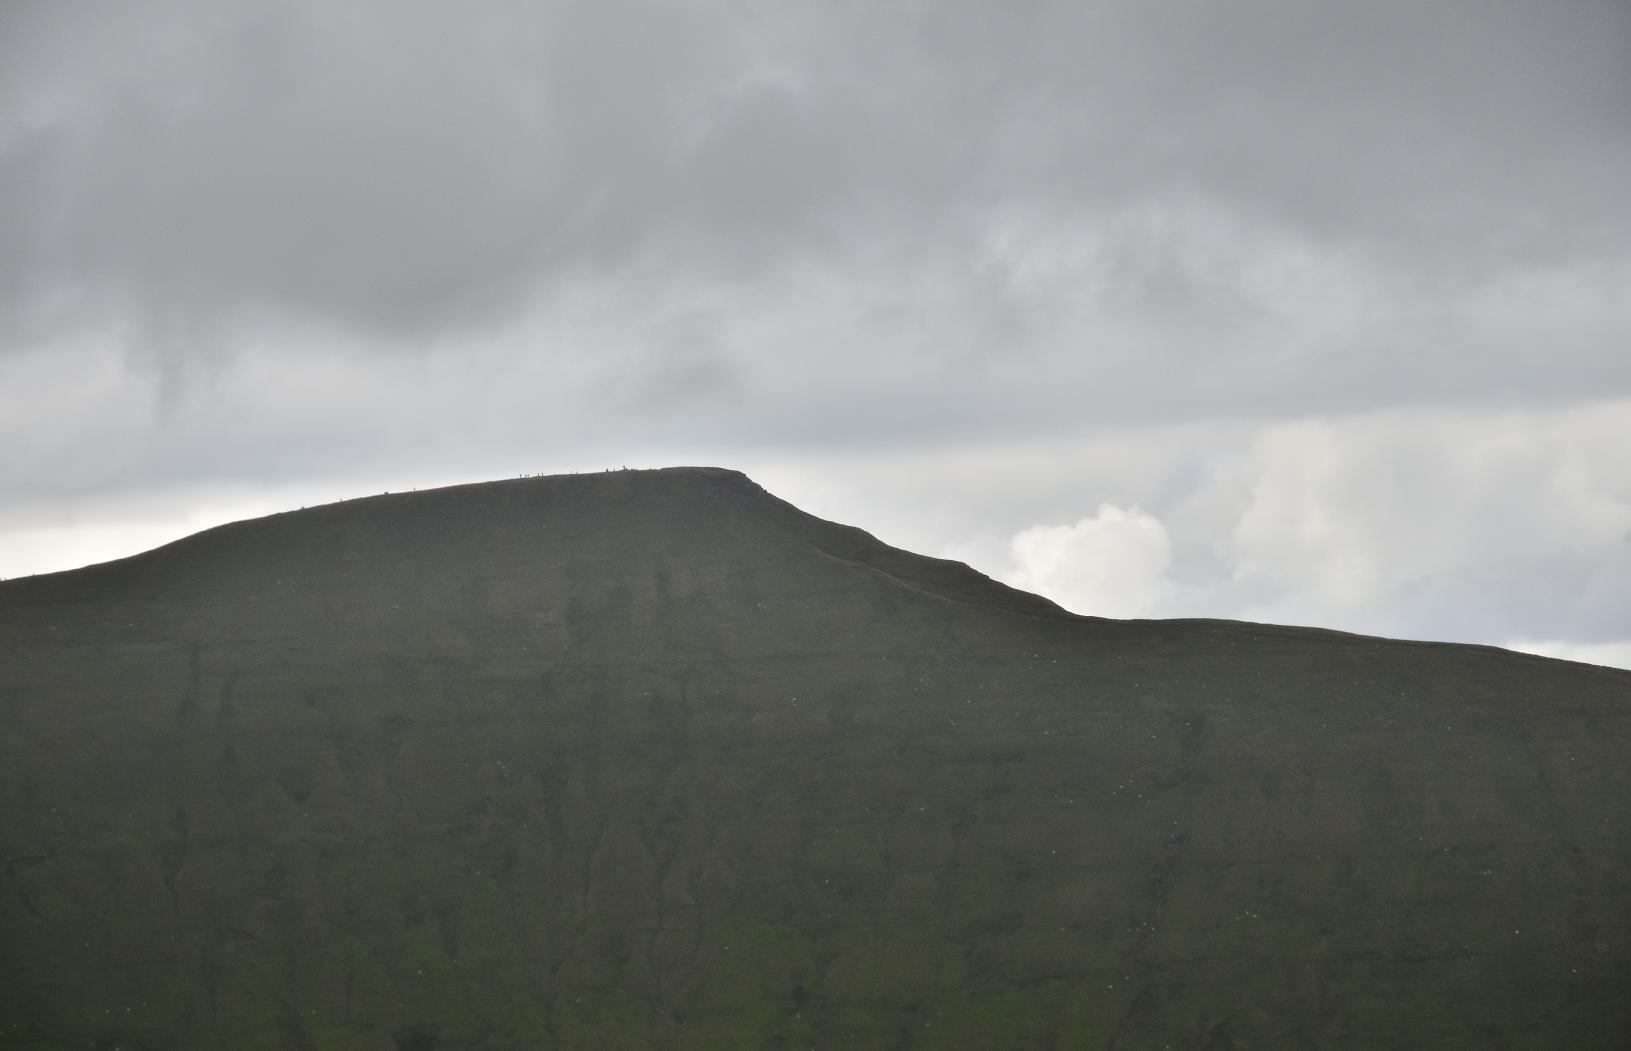 People walking along the path to or from the summit of Pen Y Fan